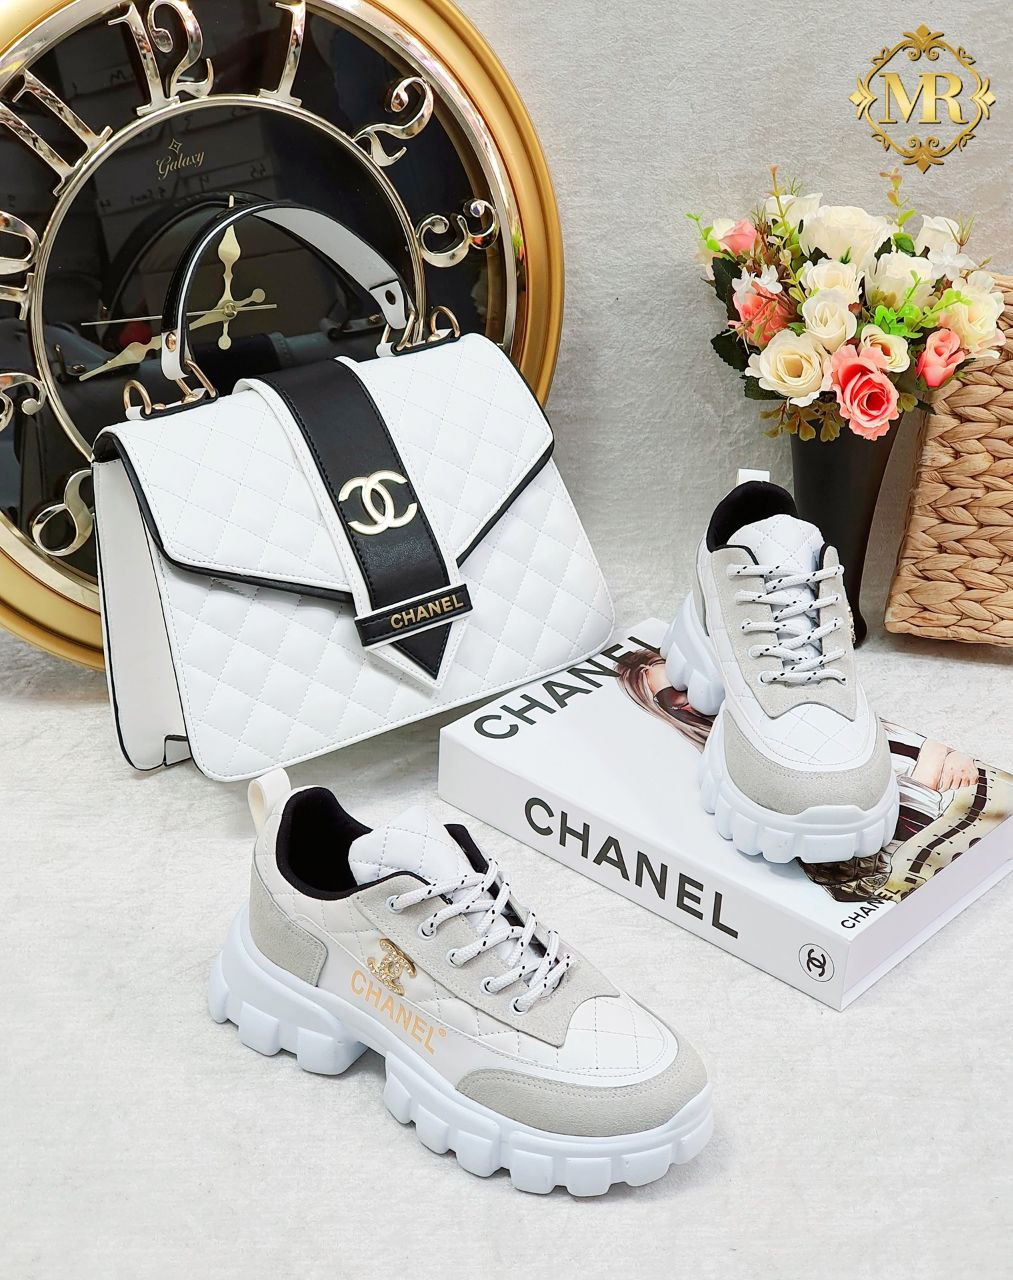 Chanel sneakers Istanbul